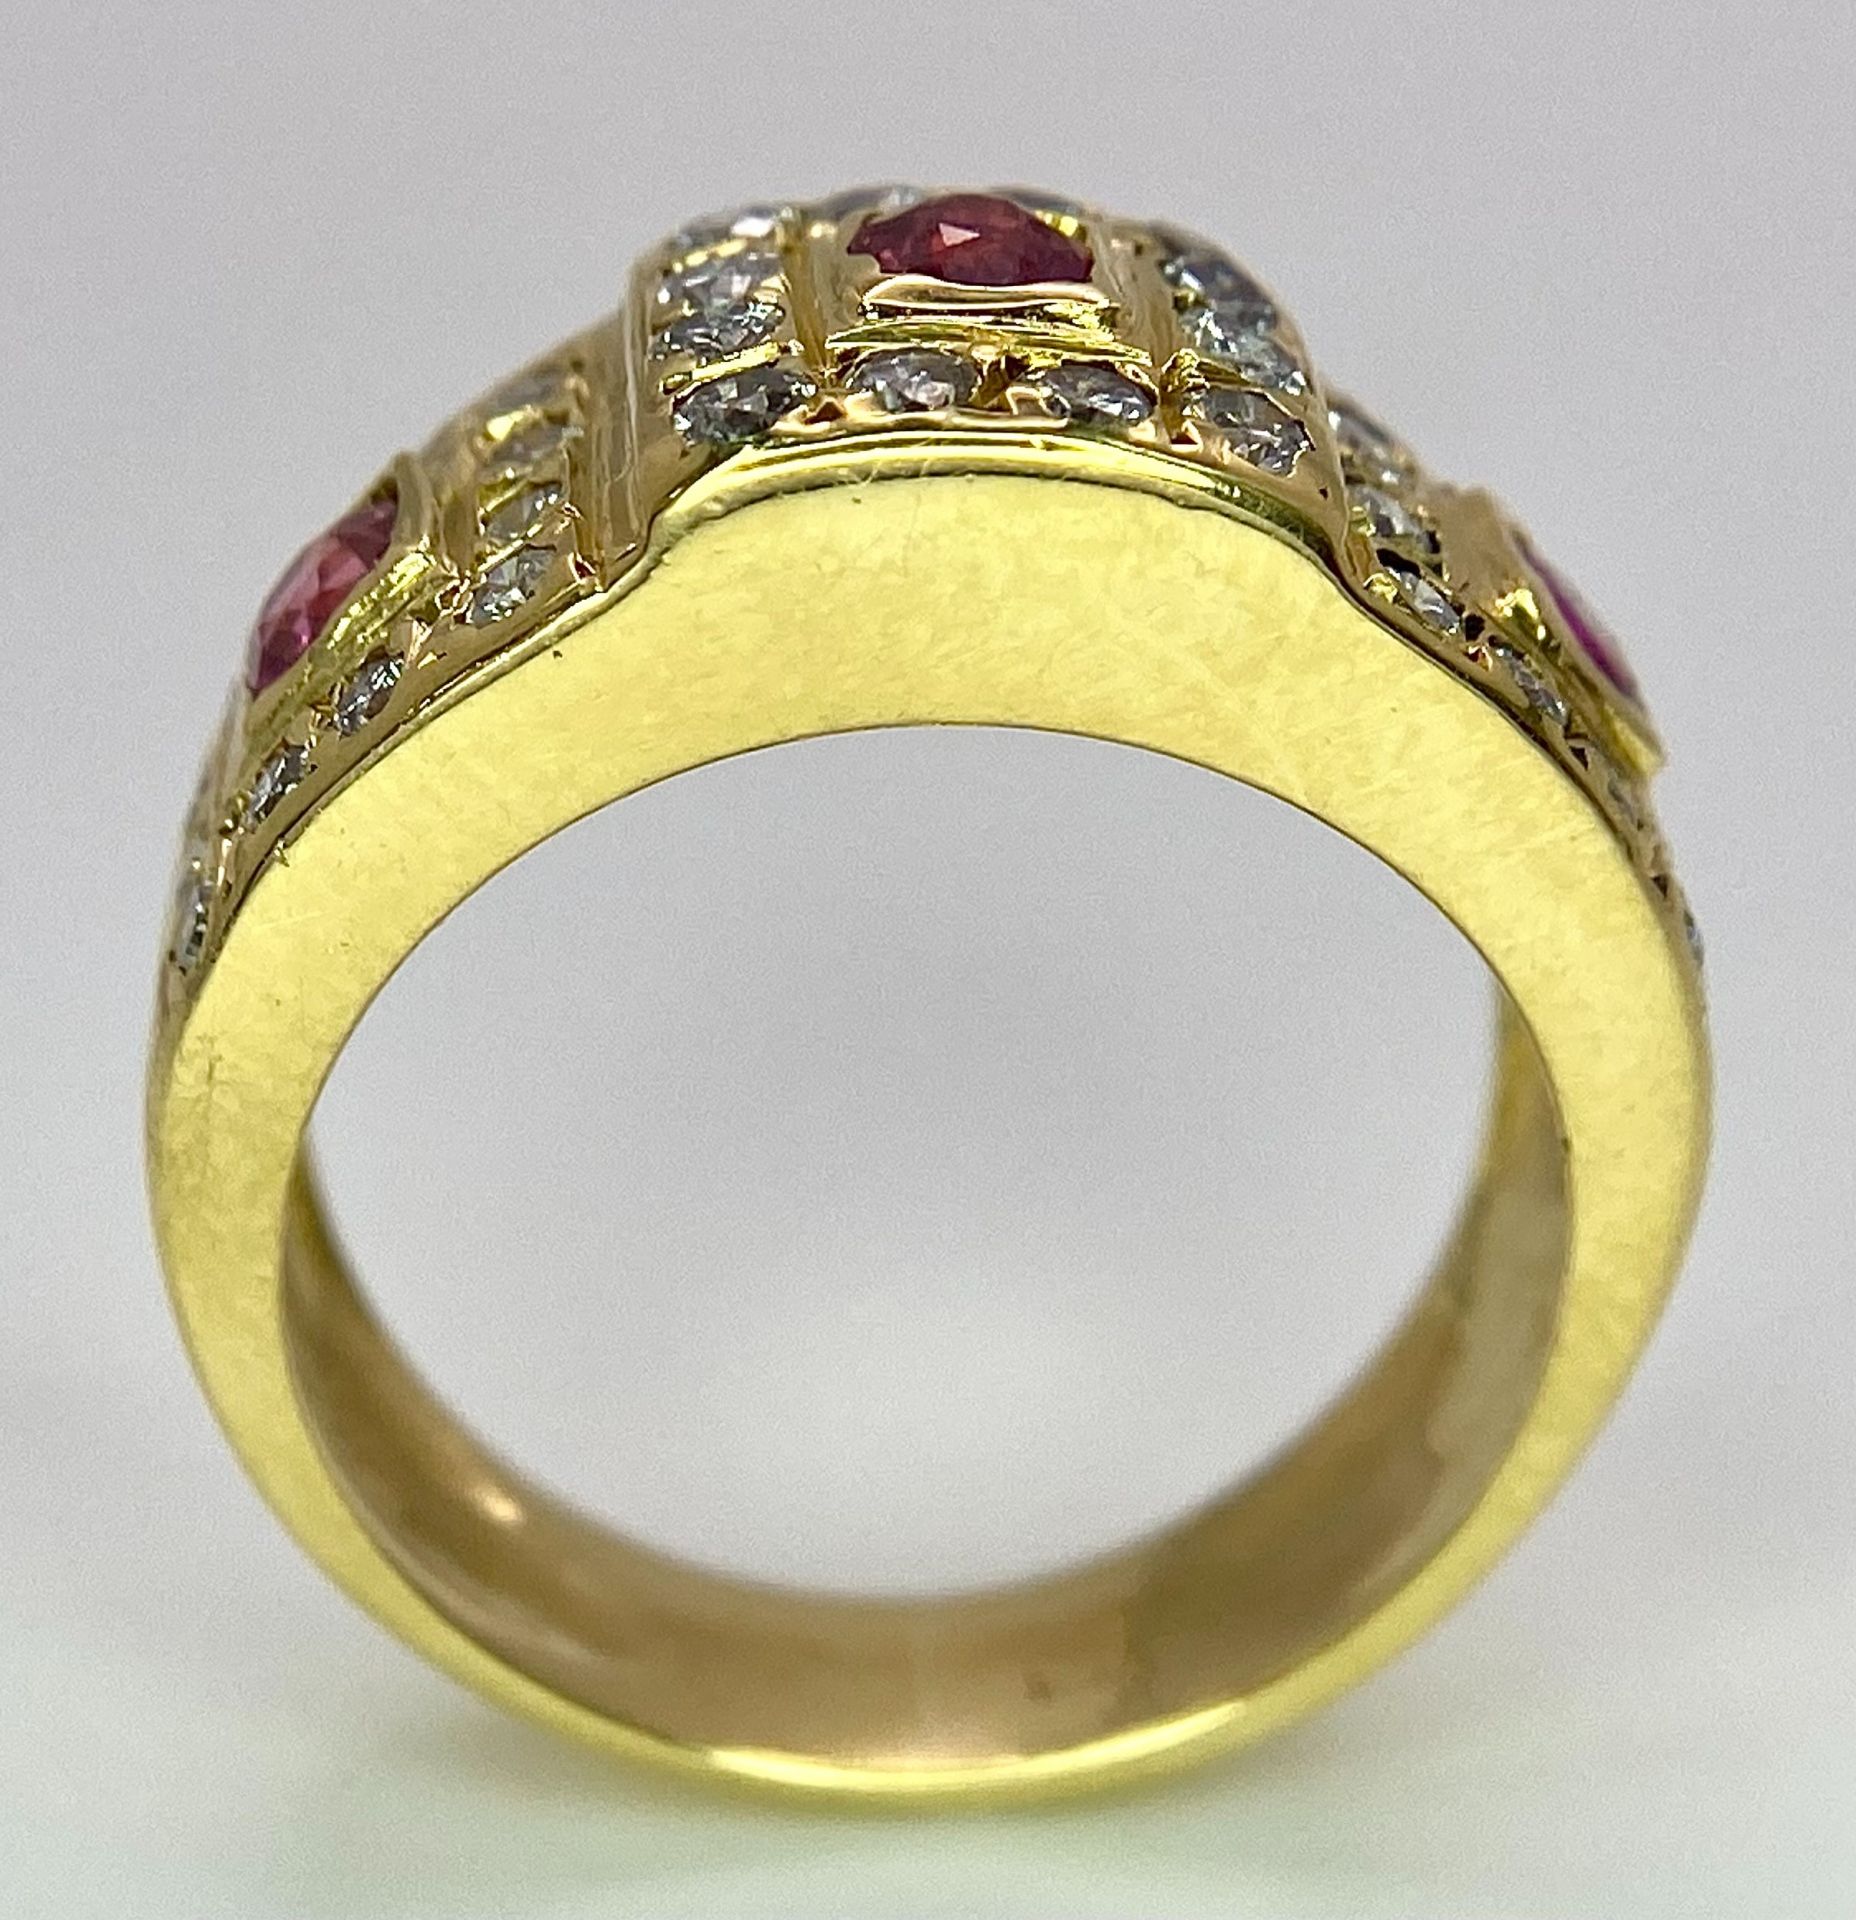 AN 18K YELLOW GOLD DIAMOND & RUBY RING. 0.60ctw, size K, 6.8g total weight. Ref: SC 8072 - Image 7 of 9